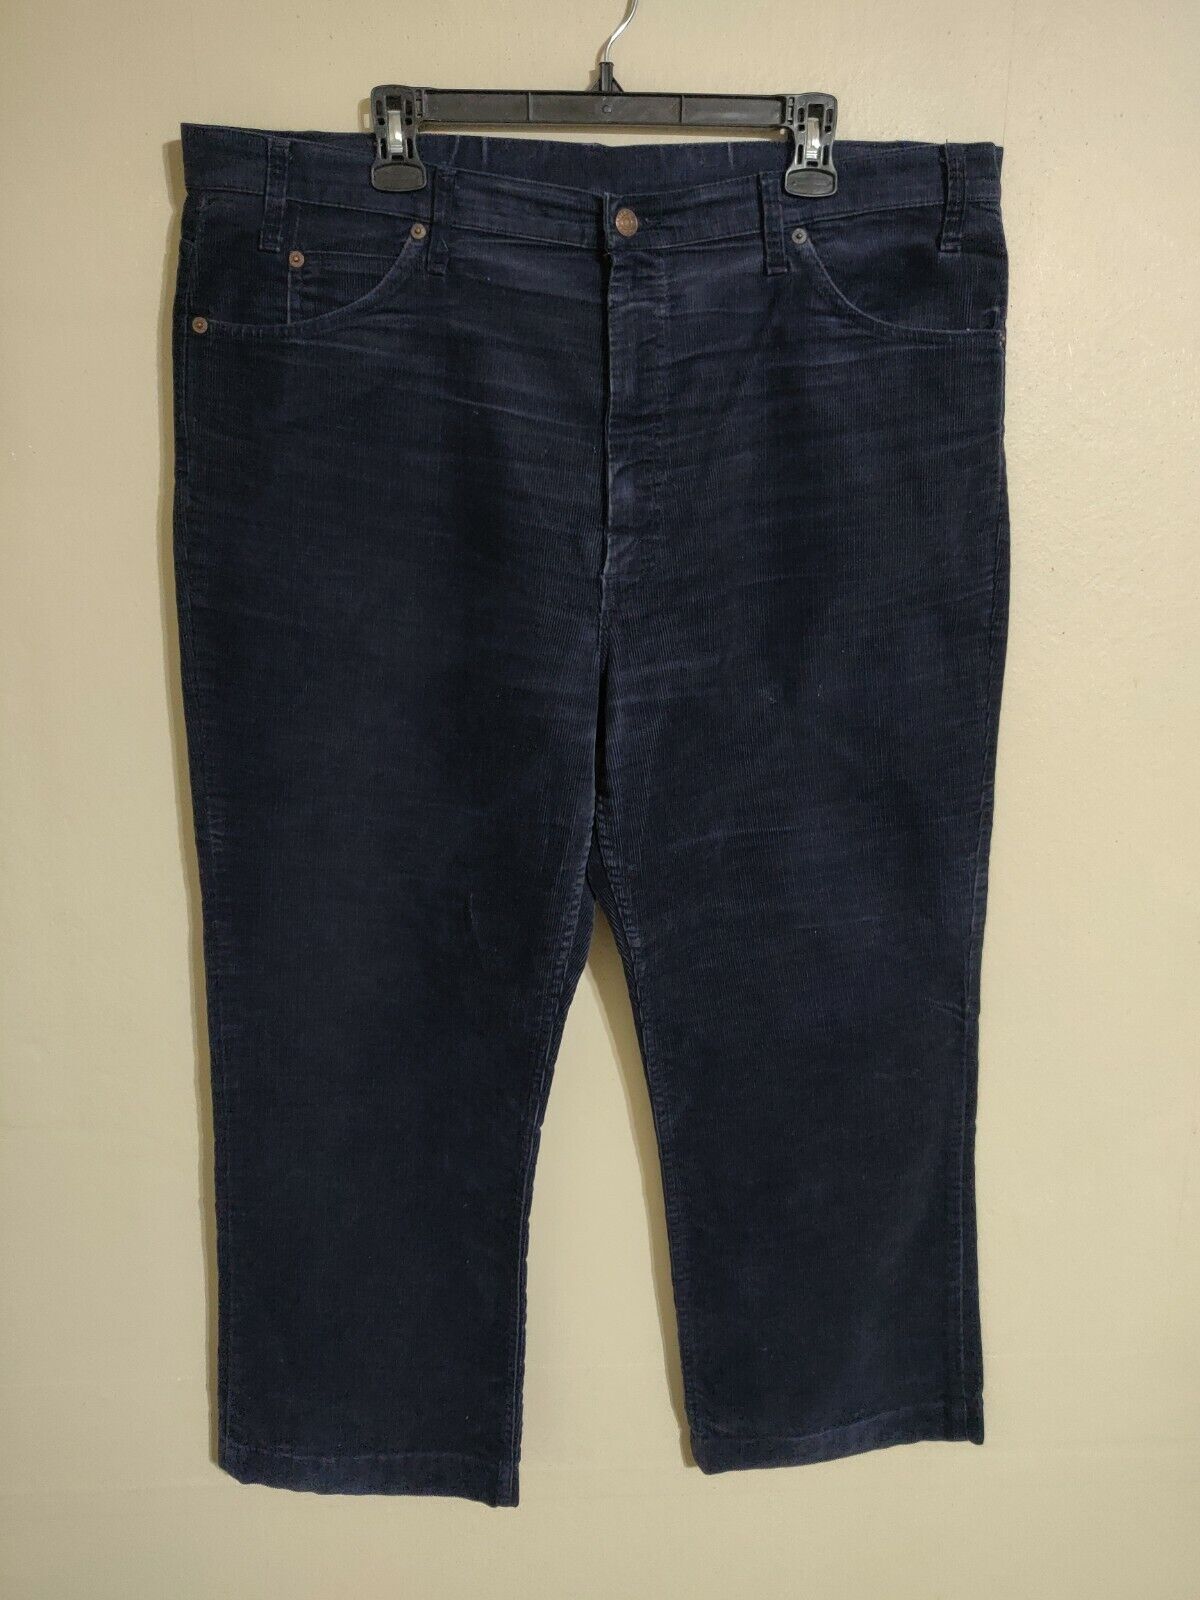 Vintage Levi's 517 1517 Made in USA Navy Blue Corduroy Pants - Men's 42x27